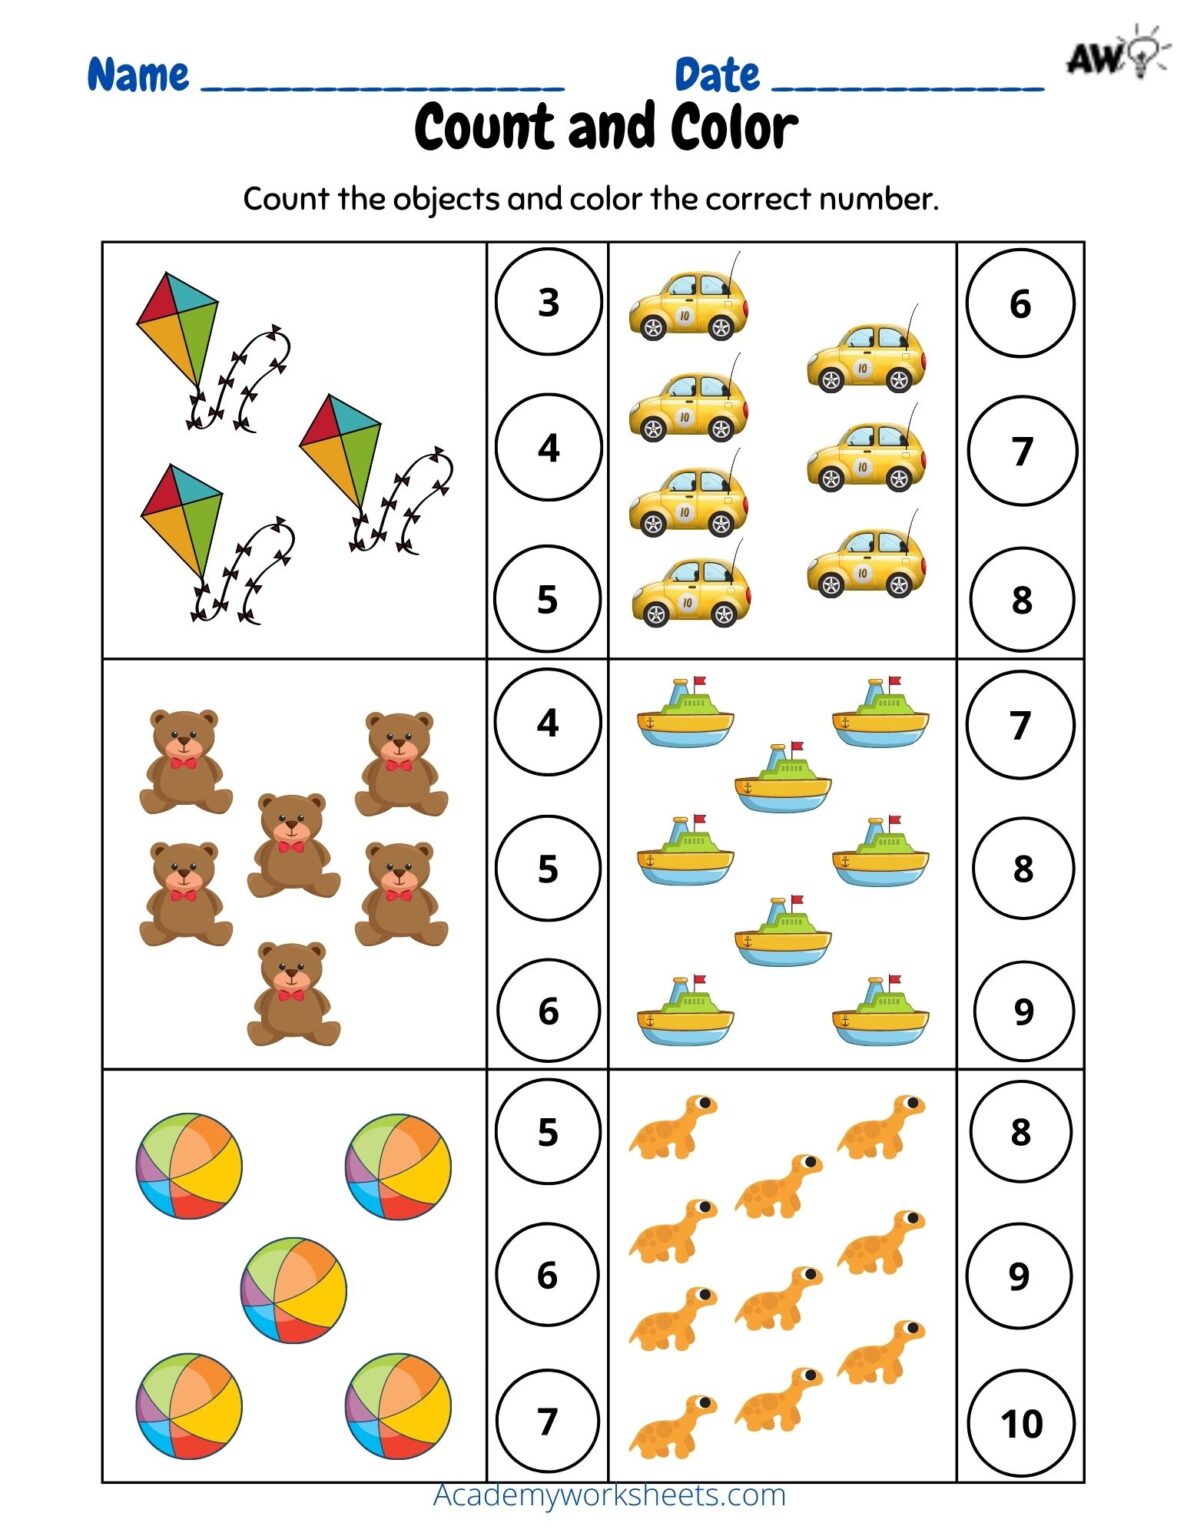 kindergarten-archives-page-4-of-10-academy-worksheets